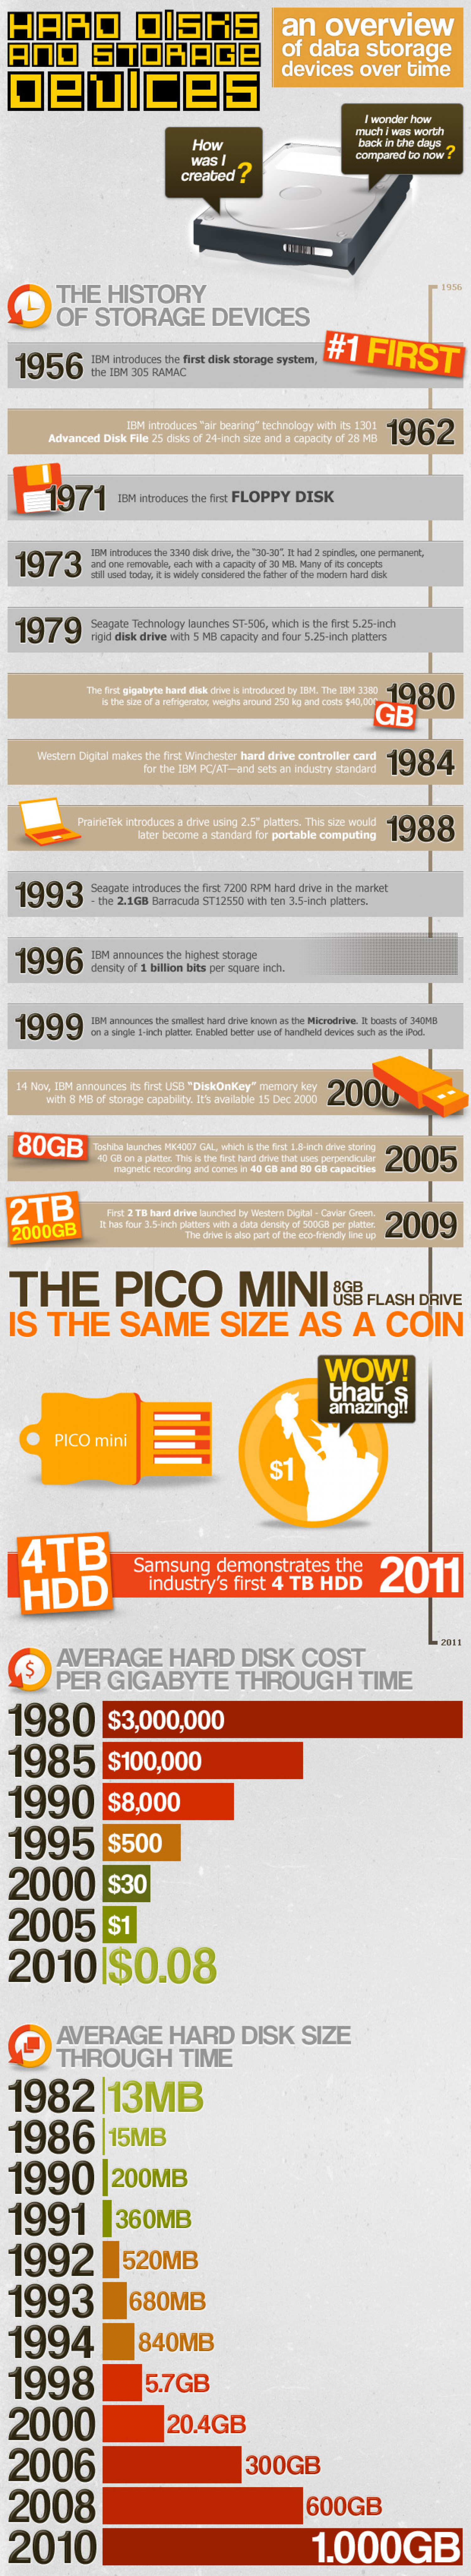 An Overview of Data Storage Devices Over Time  Infographic